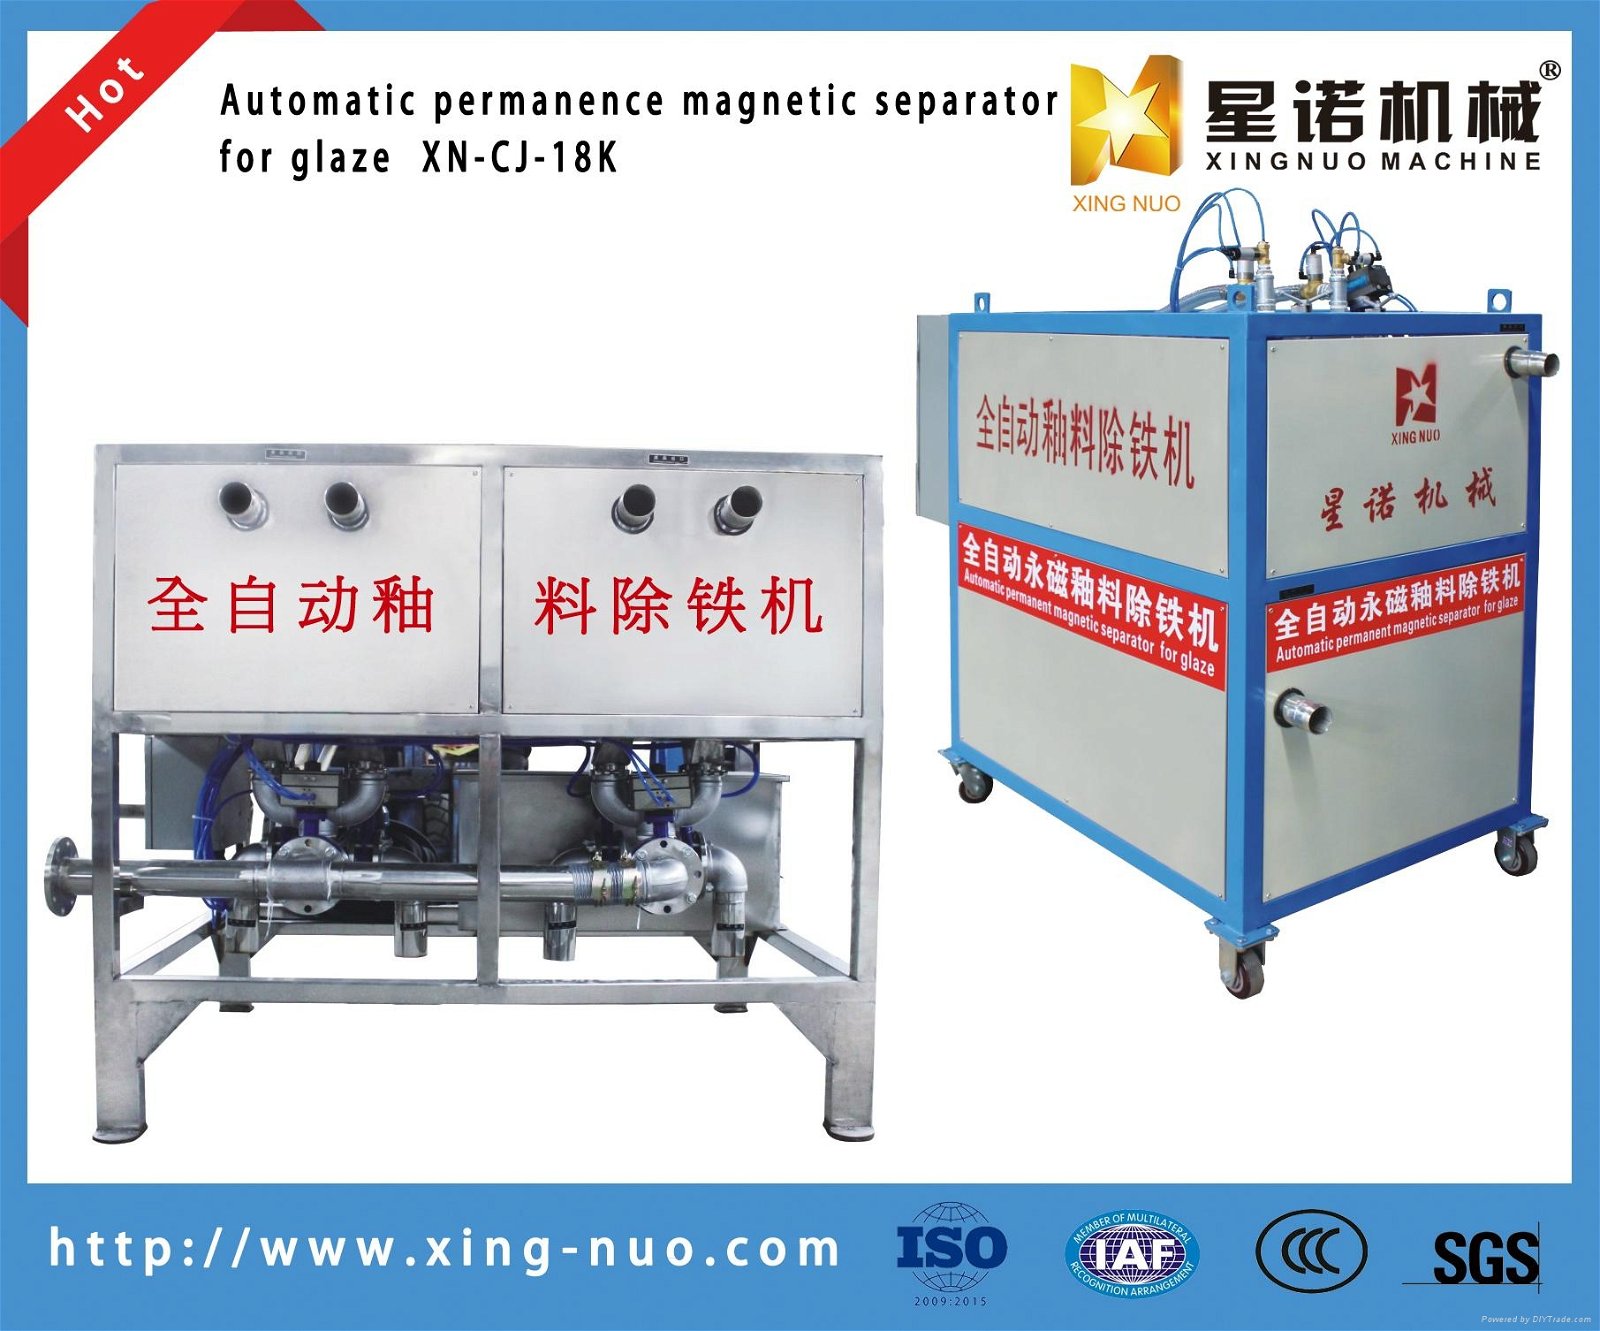 Automatic permanent magnetic separator for glaze